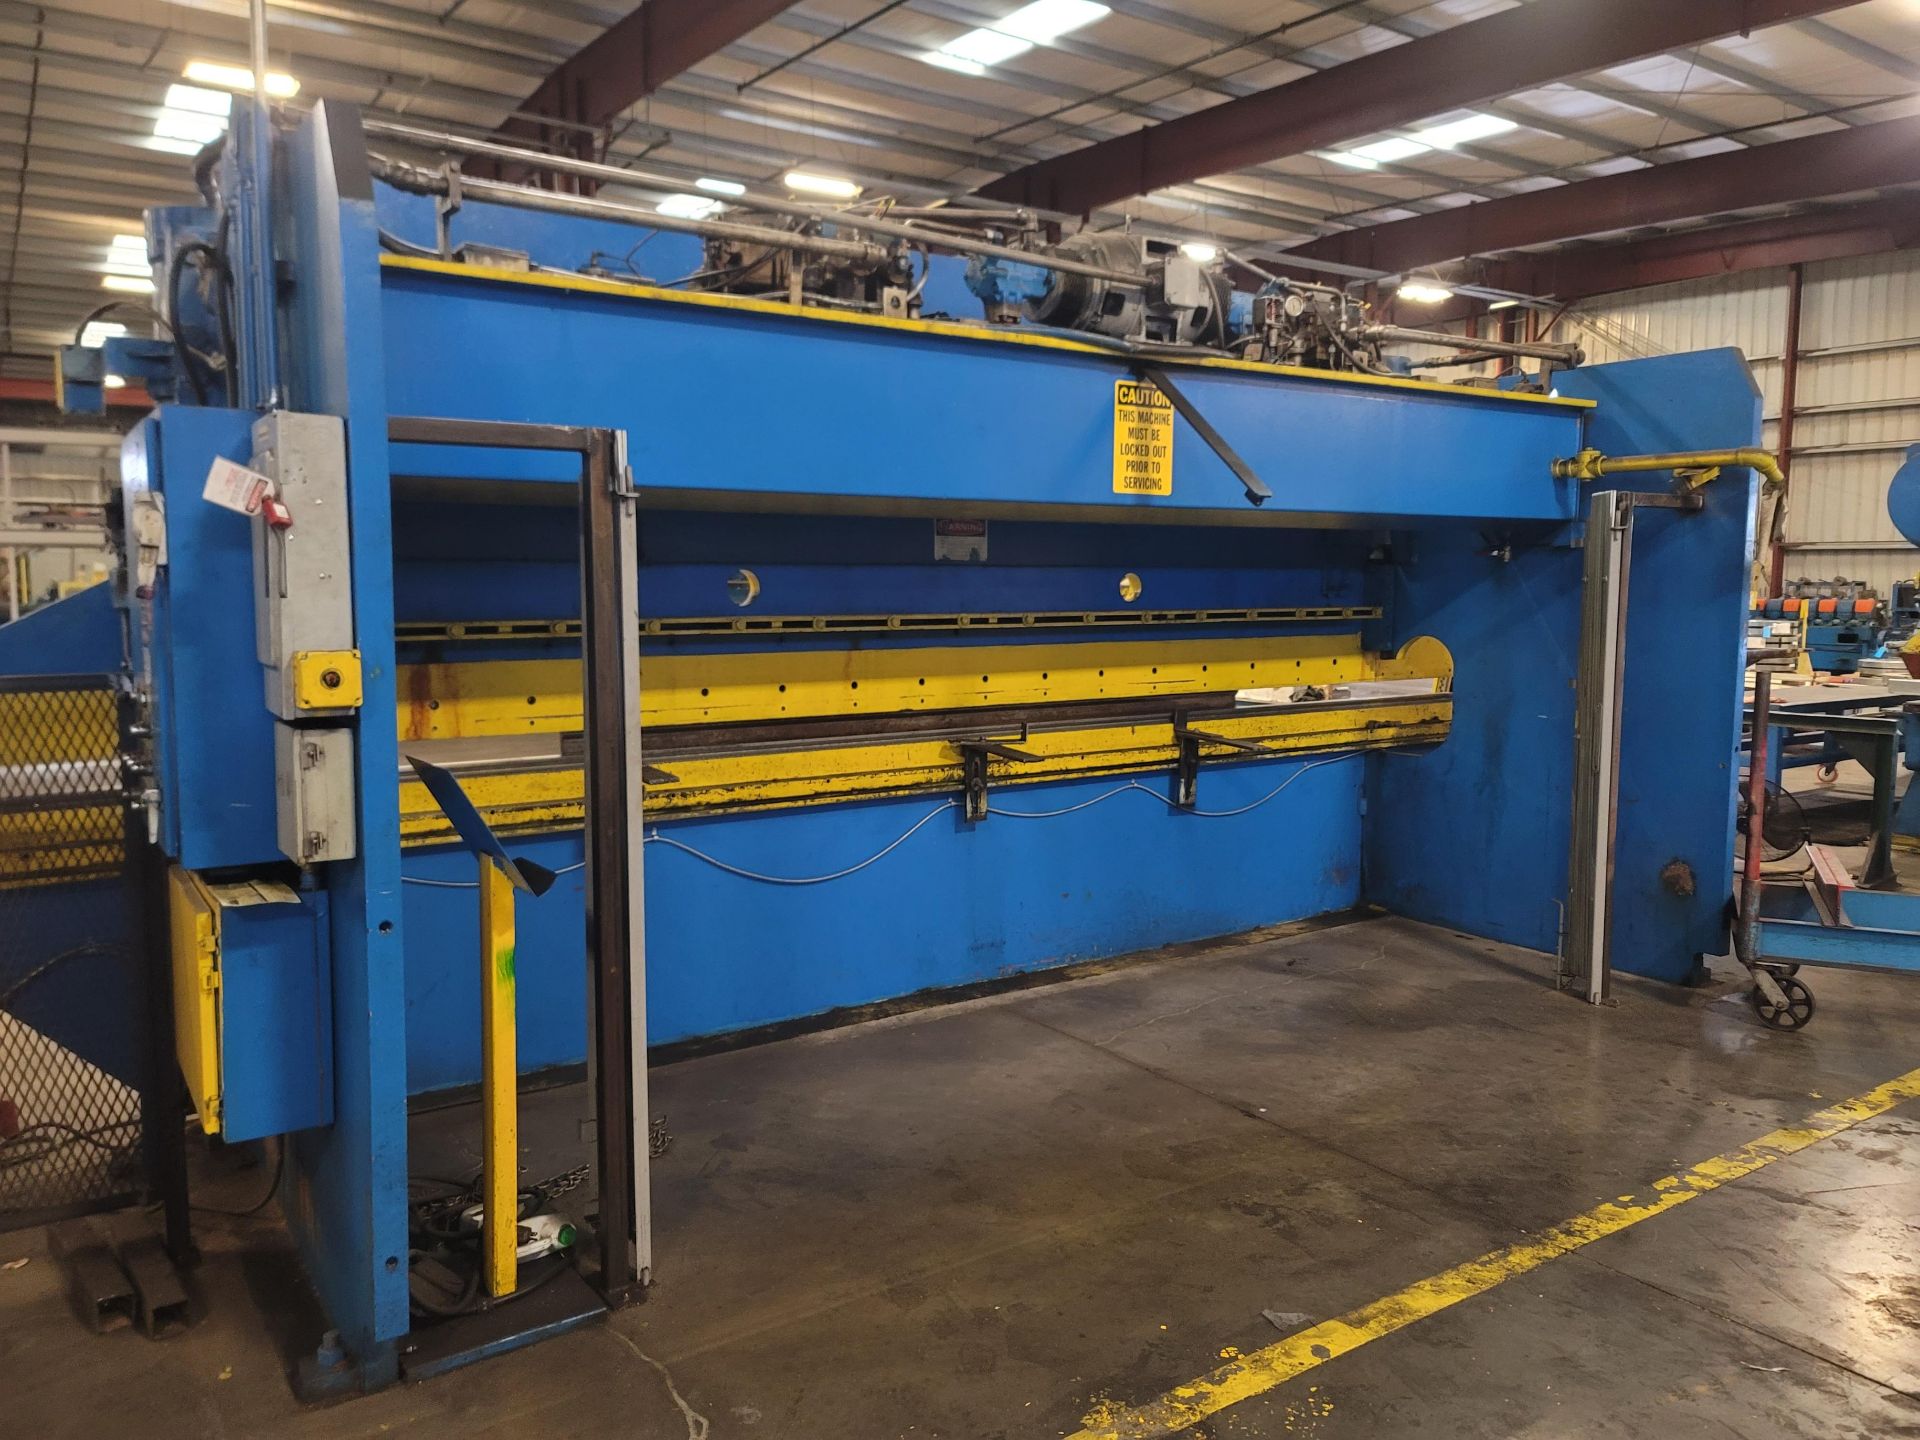 PACIFIC K175-21 PRESS BRAKE, 3/16" X 21', HYDRAULIC, PROTECH EAGLE EYE GUARDING SYSTEM, S/N 8902 - Image 6 of 12